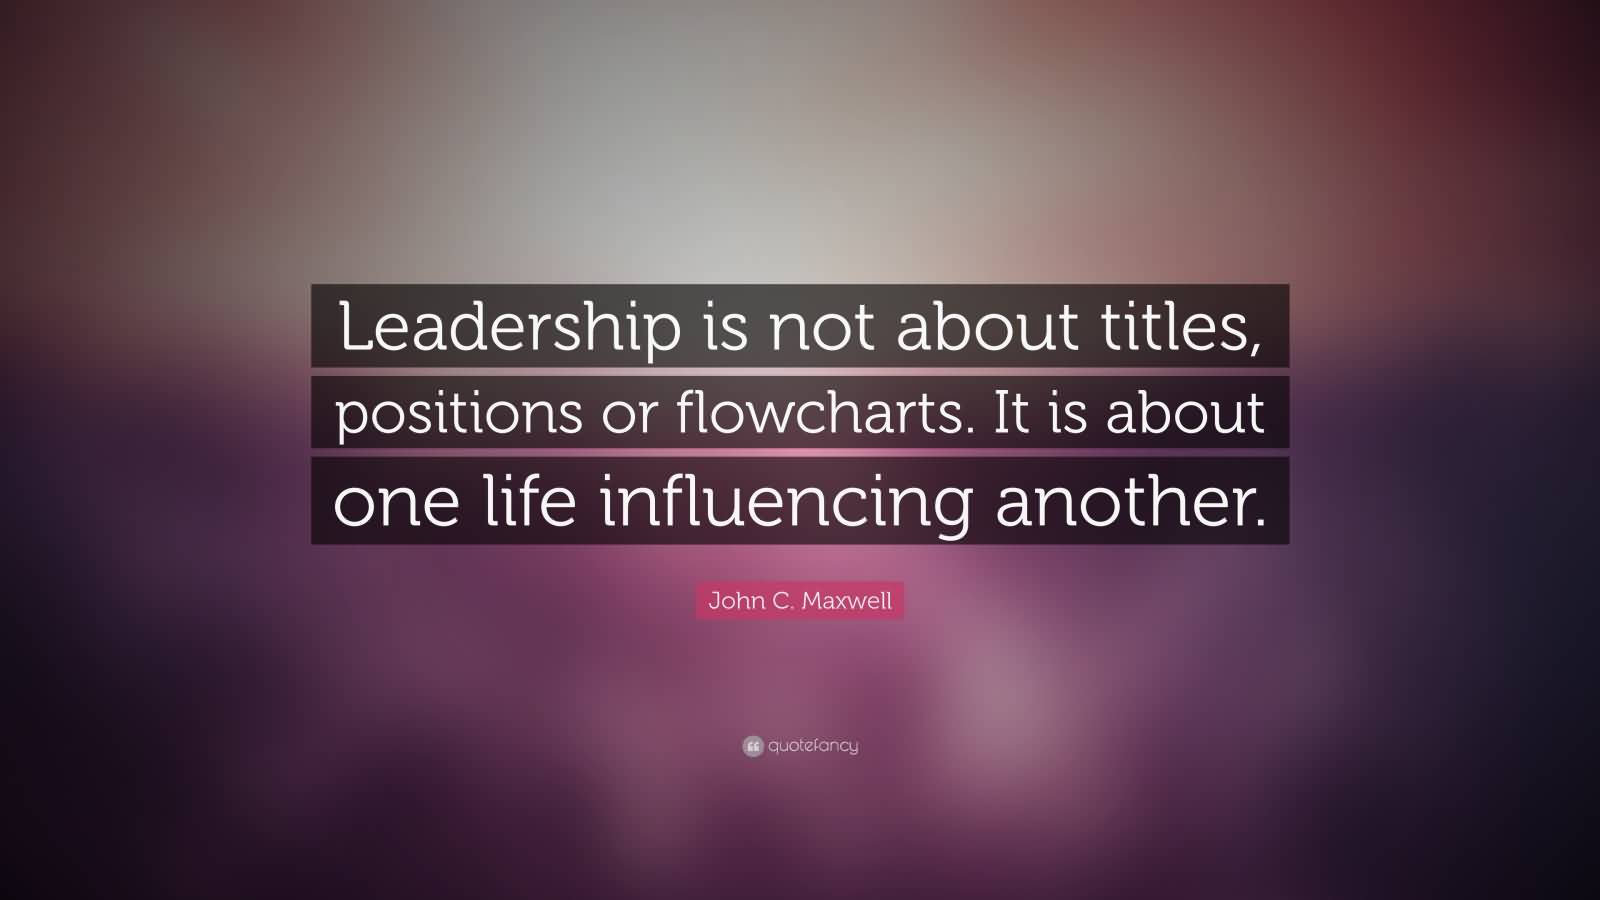 Leadership is not about titles, positions or flowcharts. It is about one life influencing another - John Maxwell